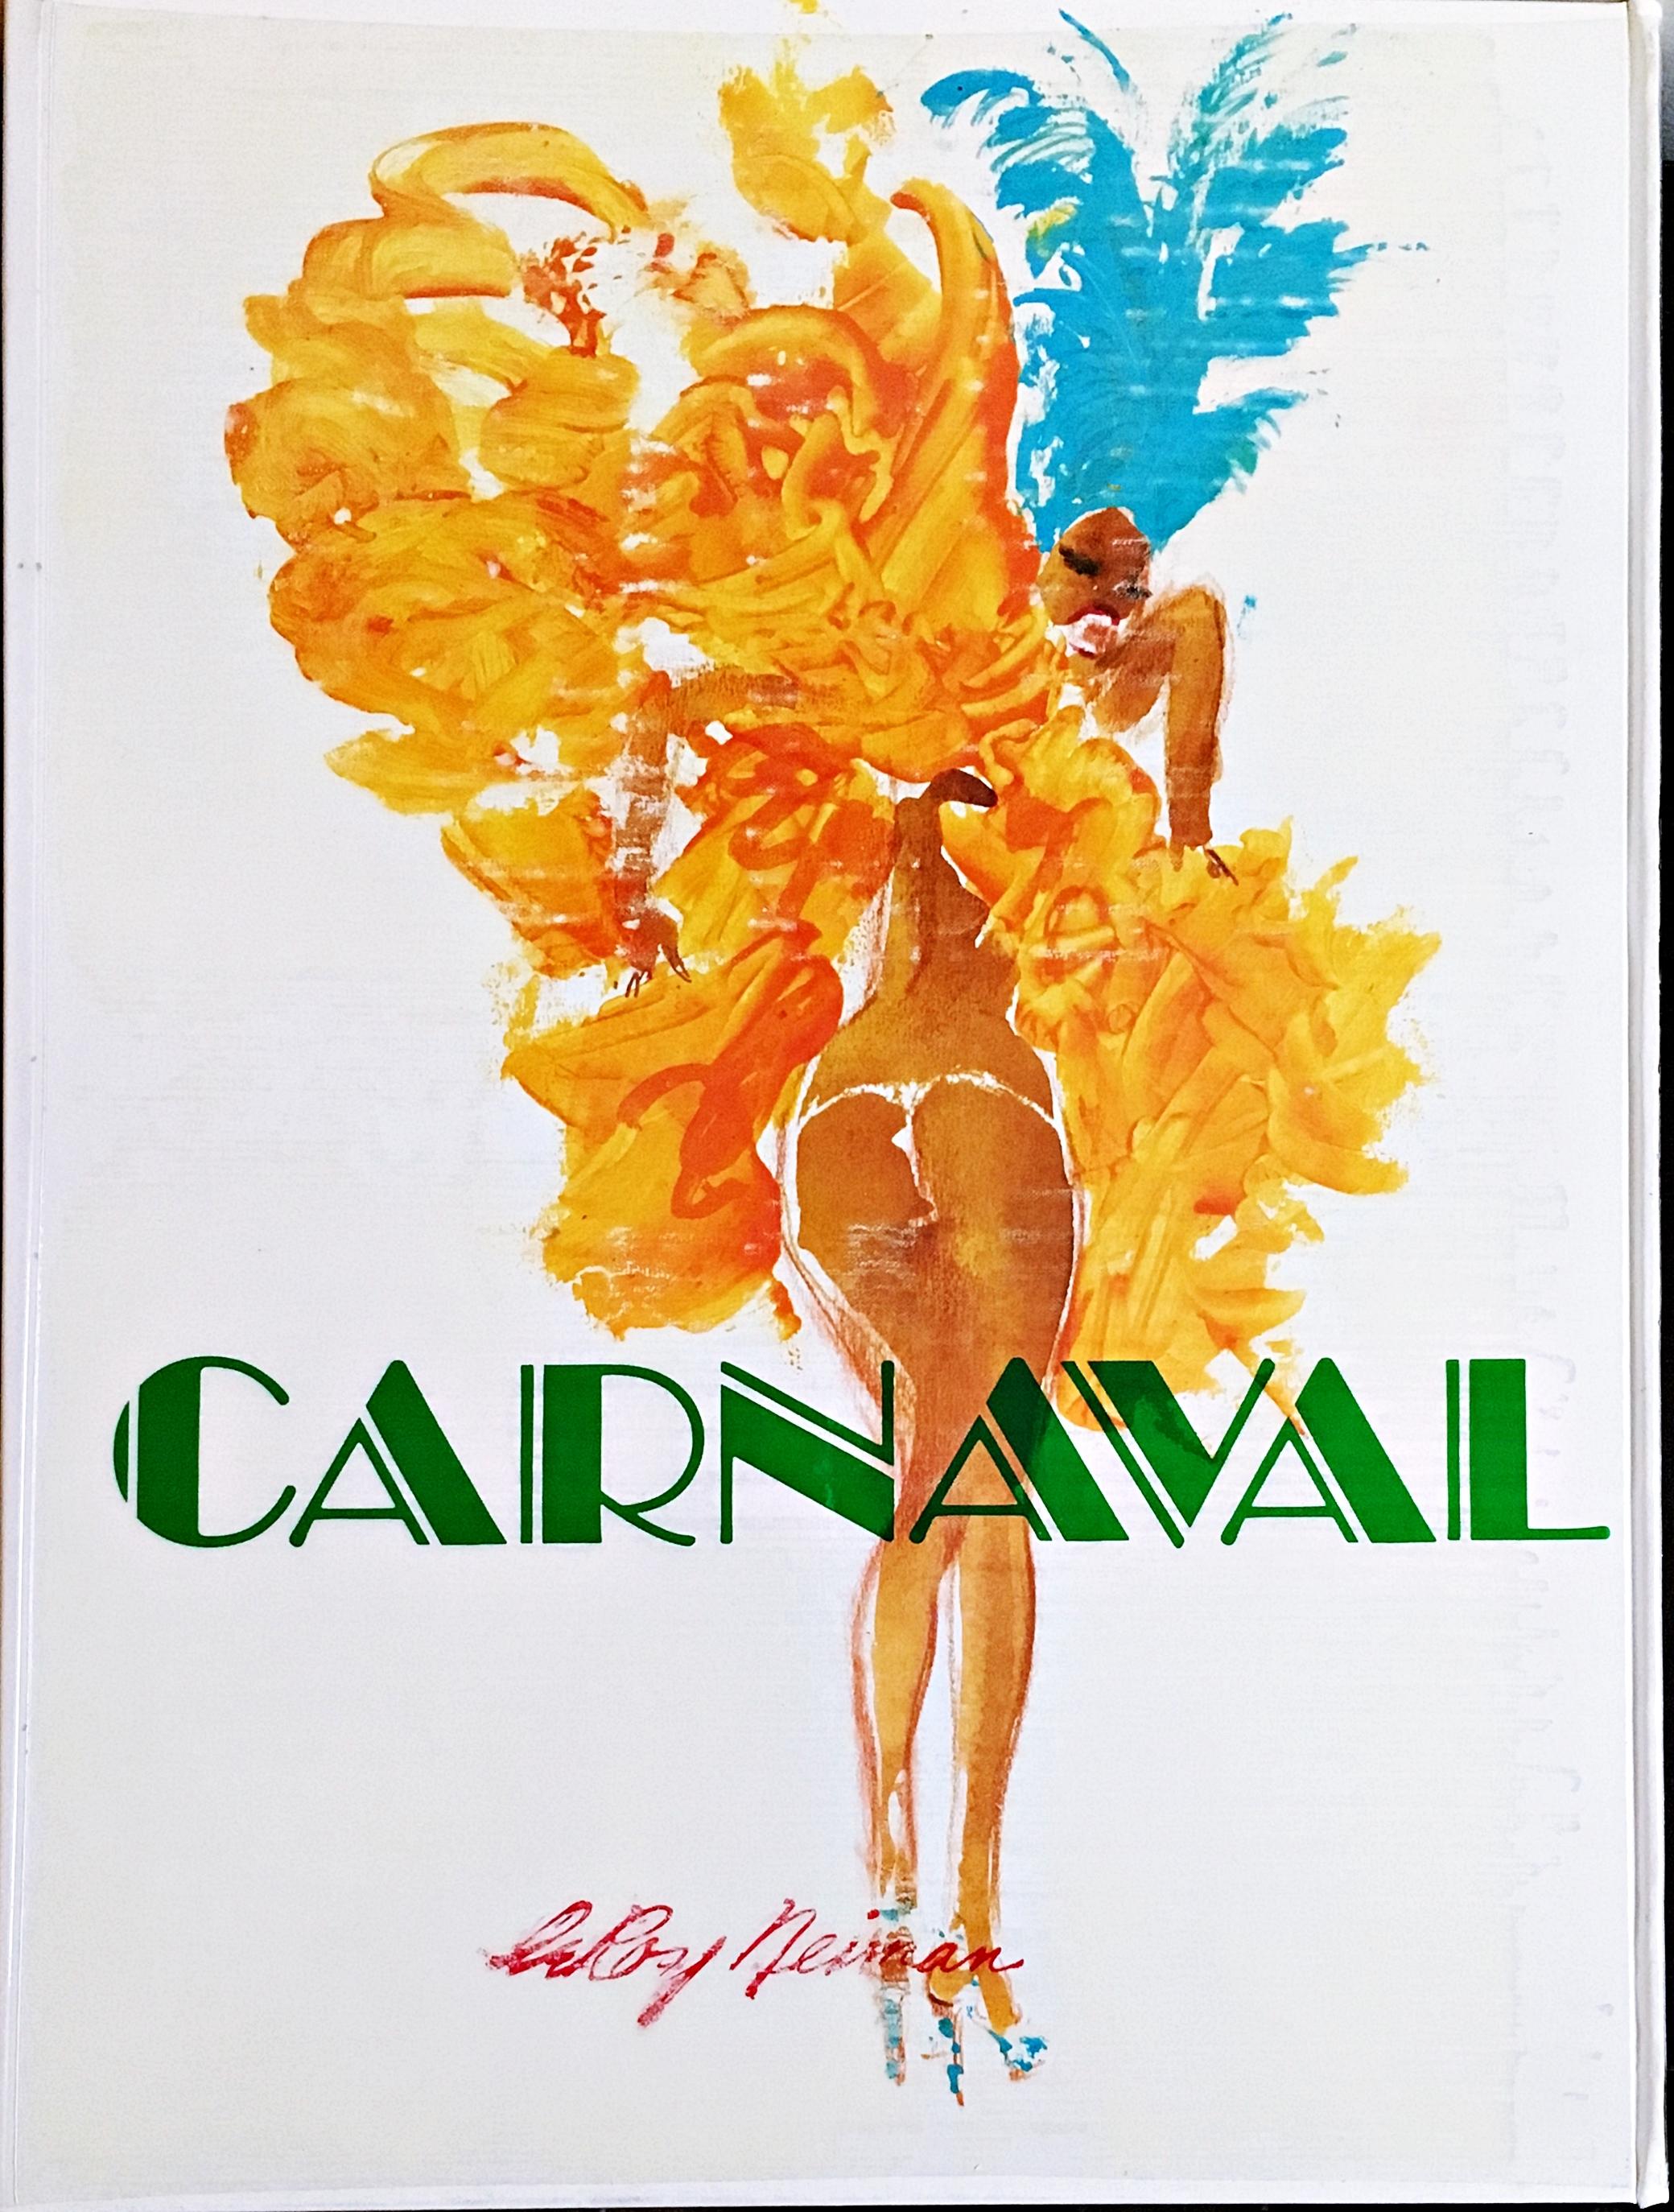 LeRoy Neiman
Carnaval gift book in bespoke box (Hand Signed and Numbered), 1981
Hardback Monograph with Vinyl Dust Jacket. 
Hand Signed by Artist on Colophon on Vellum parchment paper. Numbered 422/1000.
17 1/5 × 12 3/4 × 4/5 inches
Unframed but